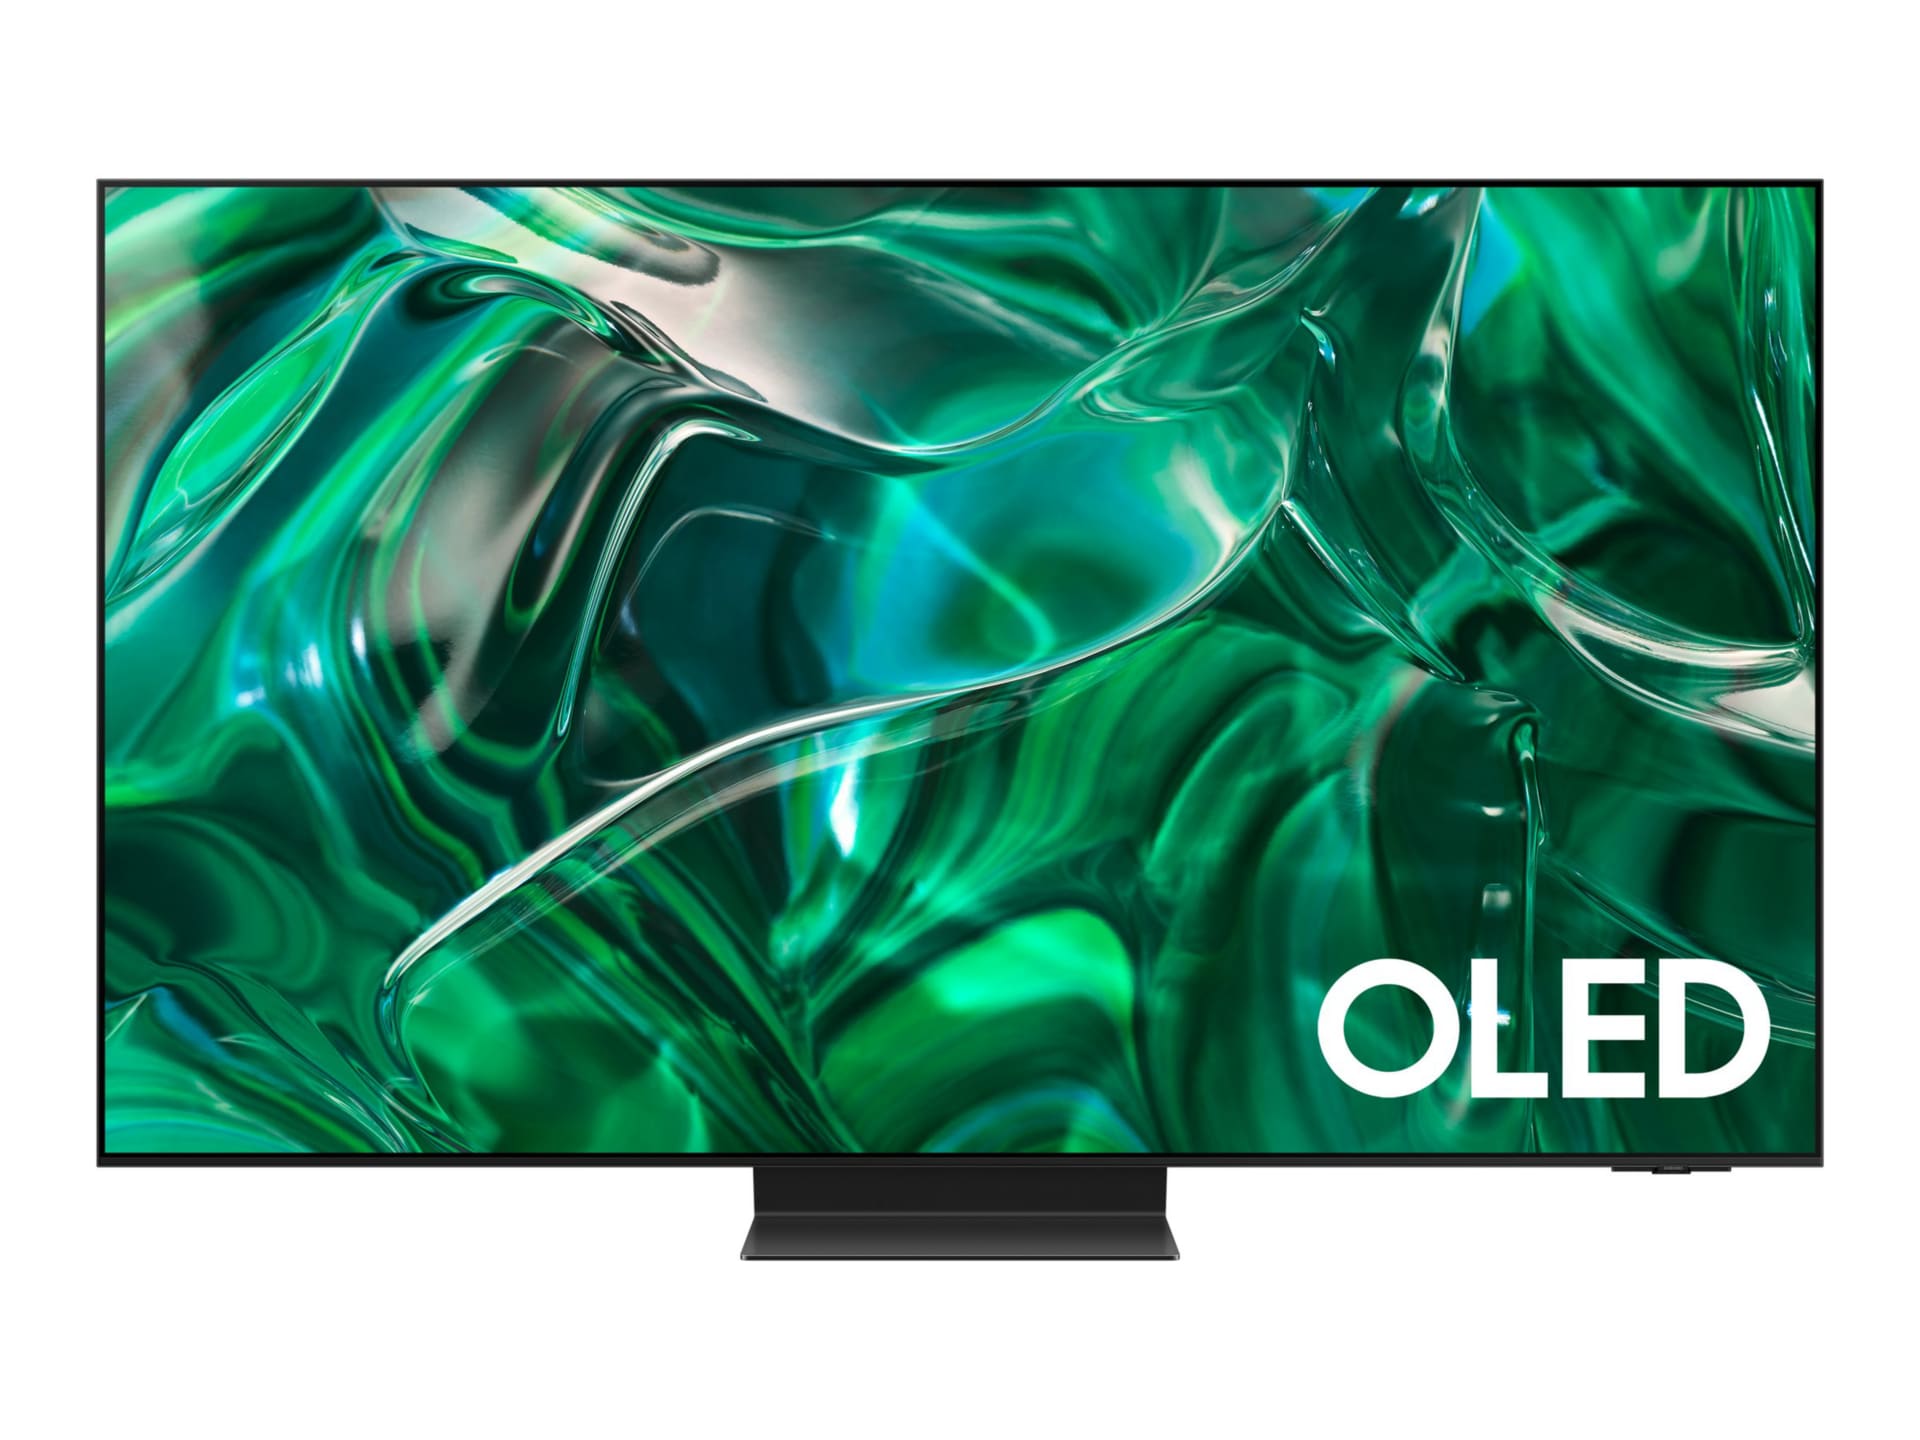 Samsung QN55S95CAF S95C Series - 55" Class (54.6" viewable) OLED TV - 4K